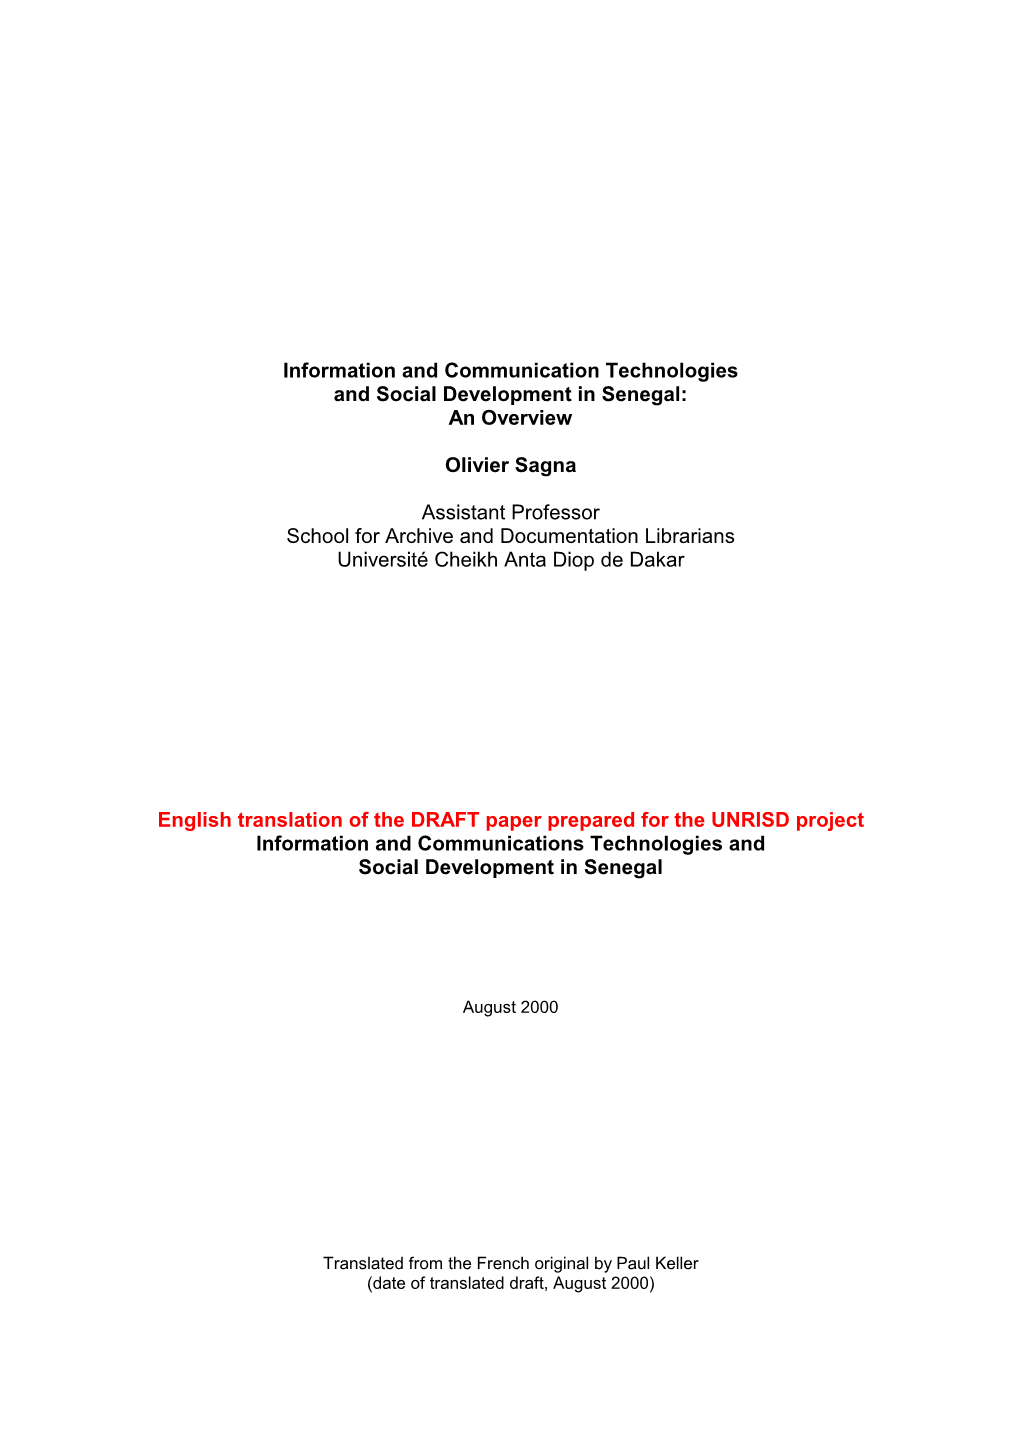 Information and Communication Technologies and Social Development in Senegal: an Overview